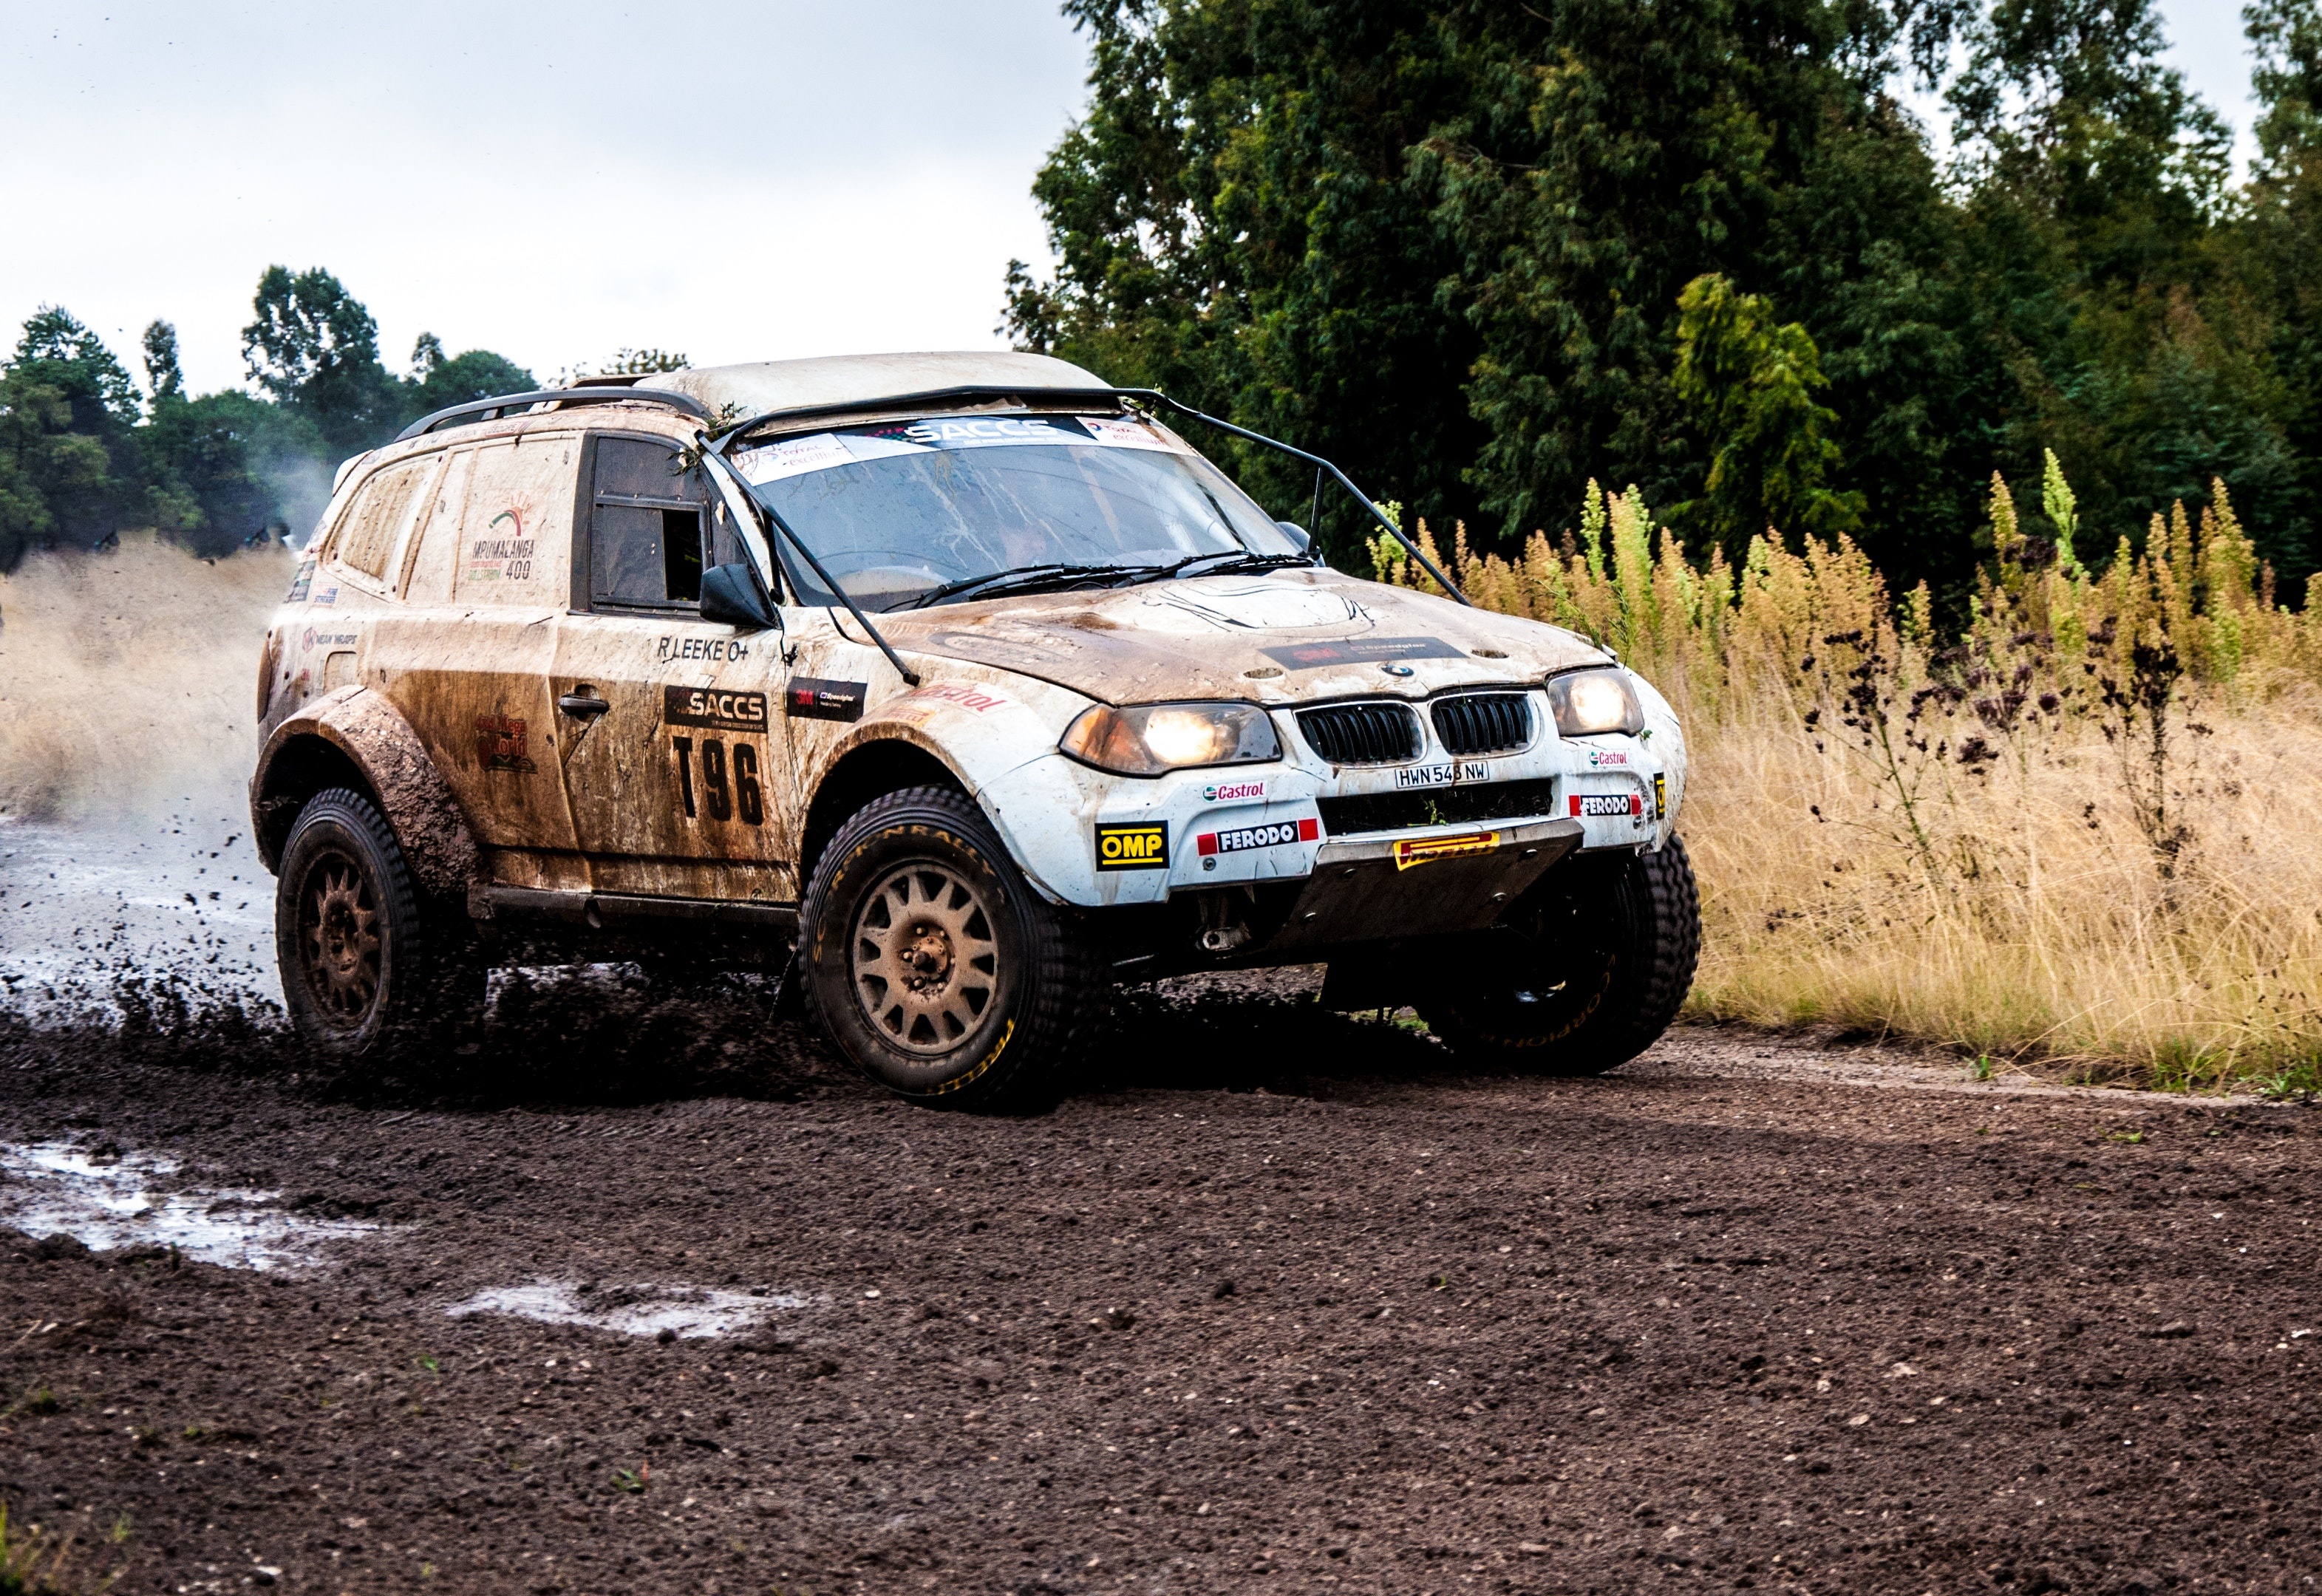 Rally Raid: Sport Utility Vehicle, Off-Road Racing, Mud On The Road, BMW, Automotive Design, SACCS. 3150x2160 HD Wallpaper.